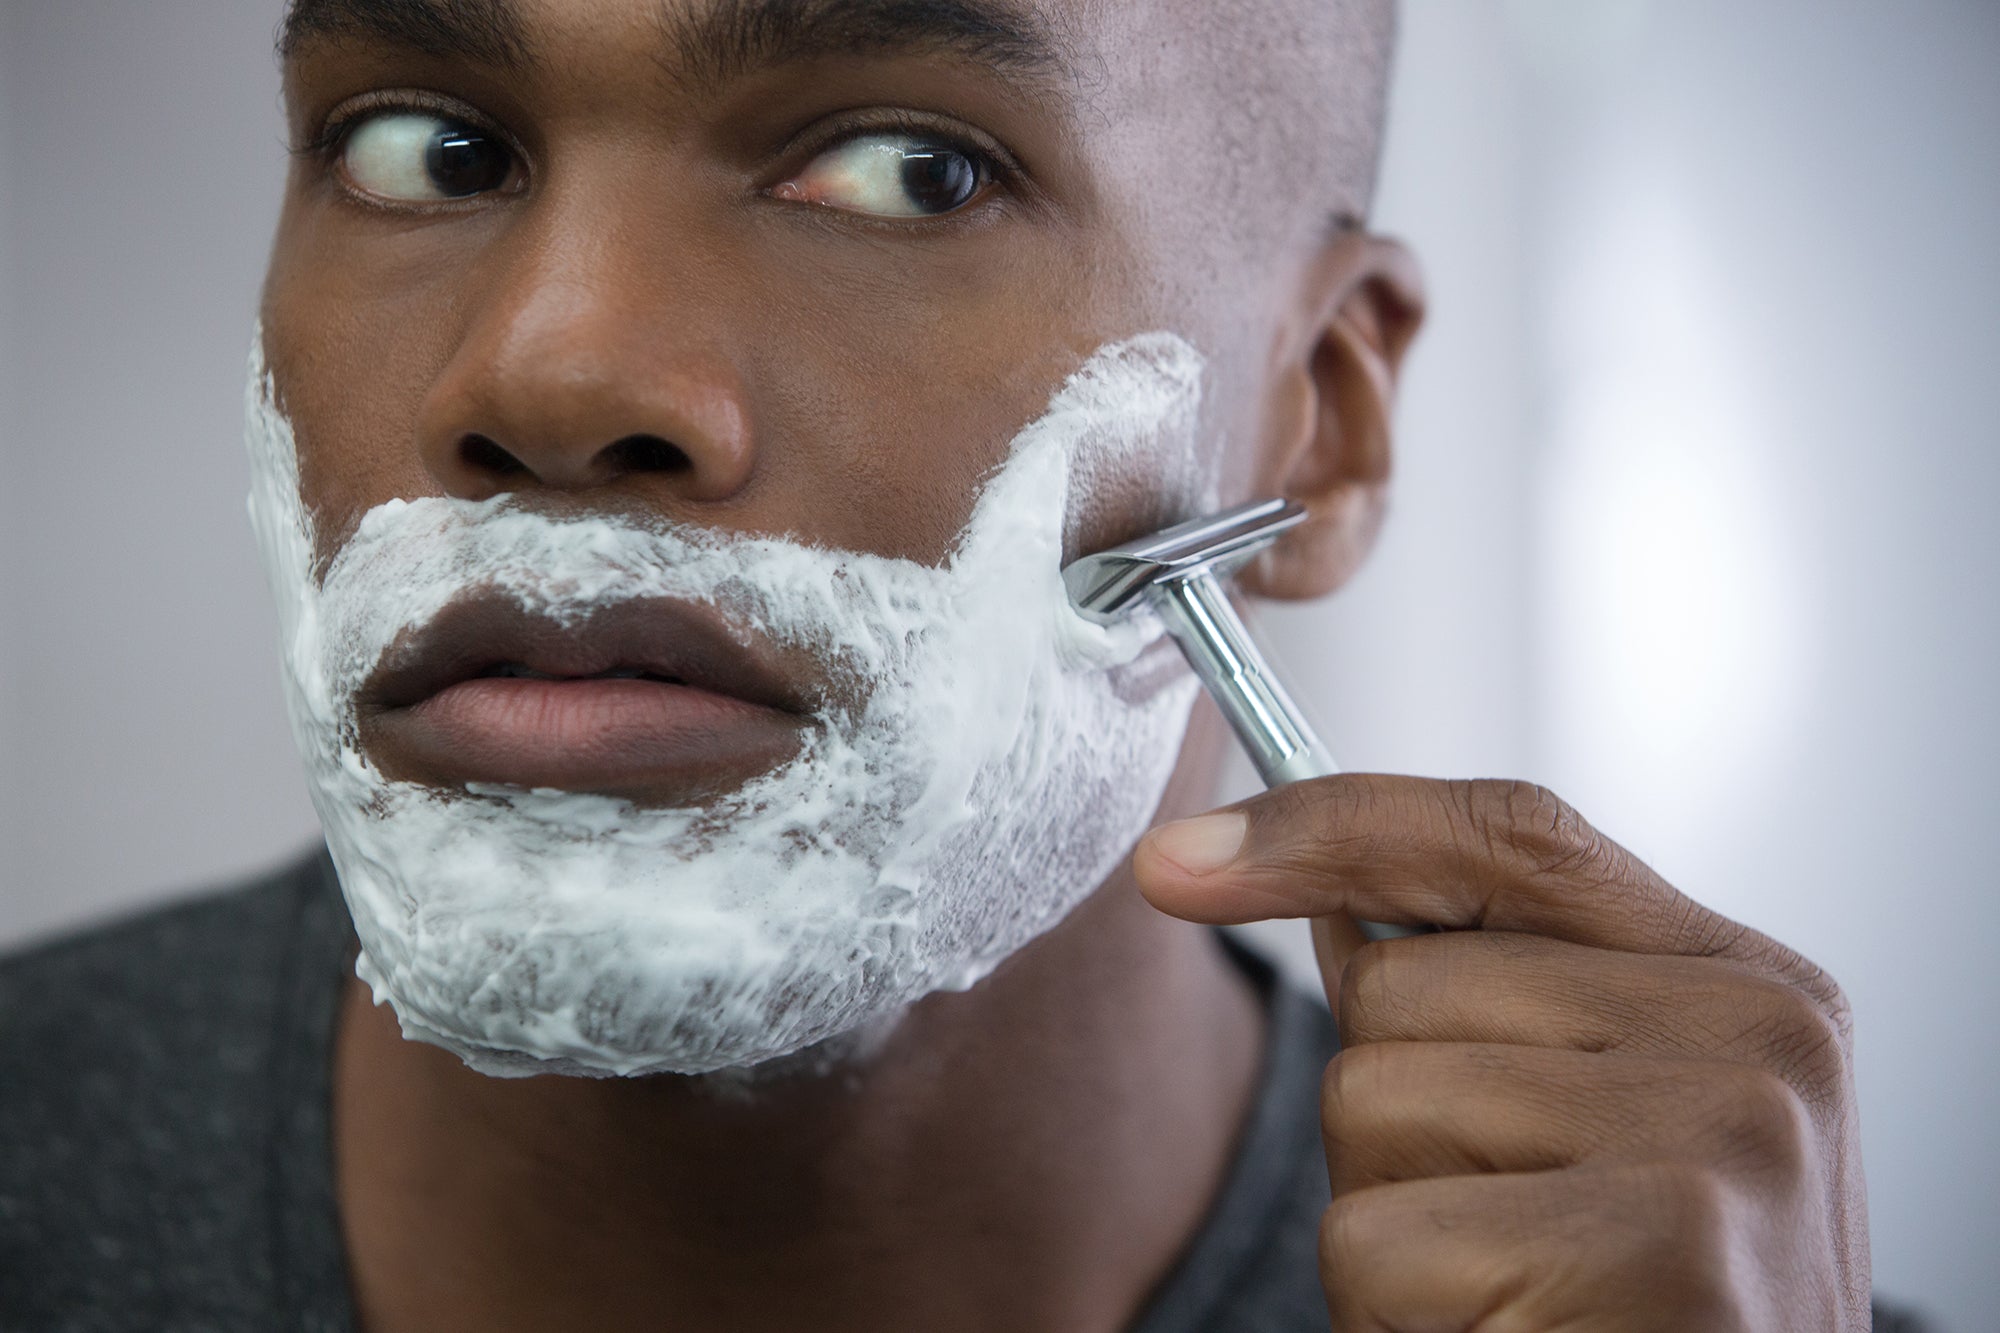 How To Get Rid Of Painful Razor Burn And Ingrown Hairs Fast With These Pro Tips